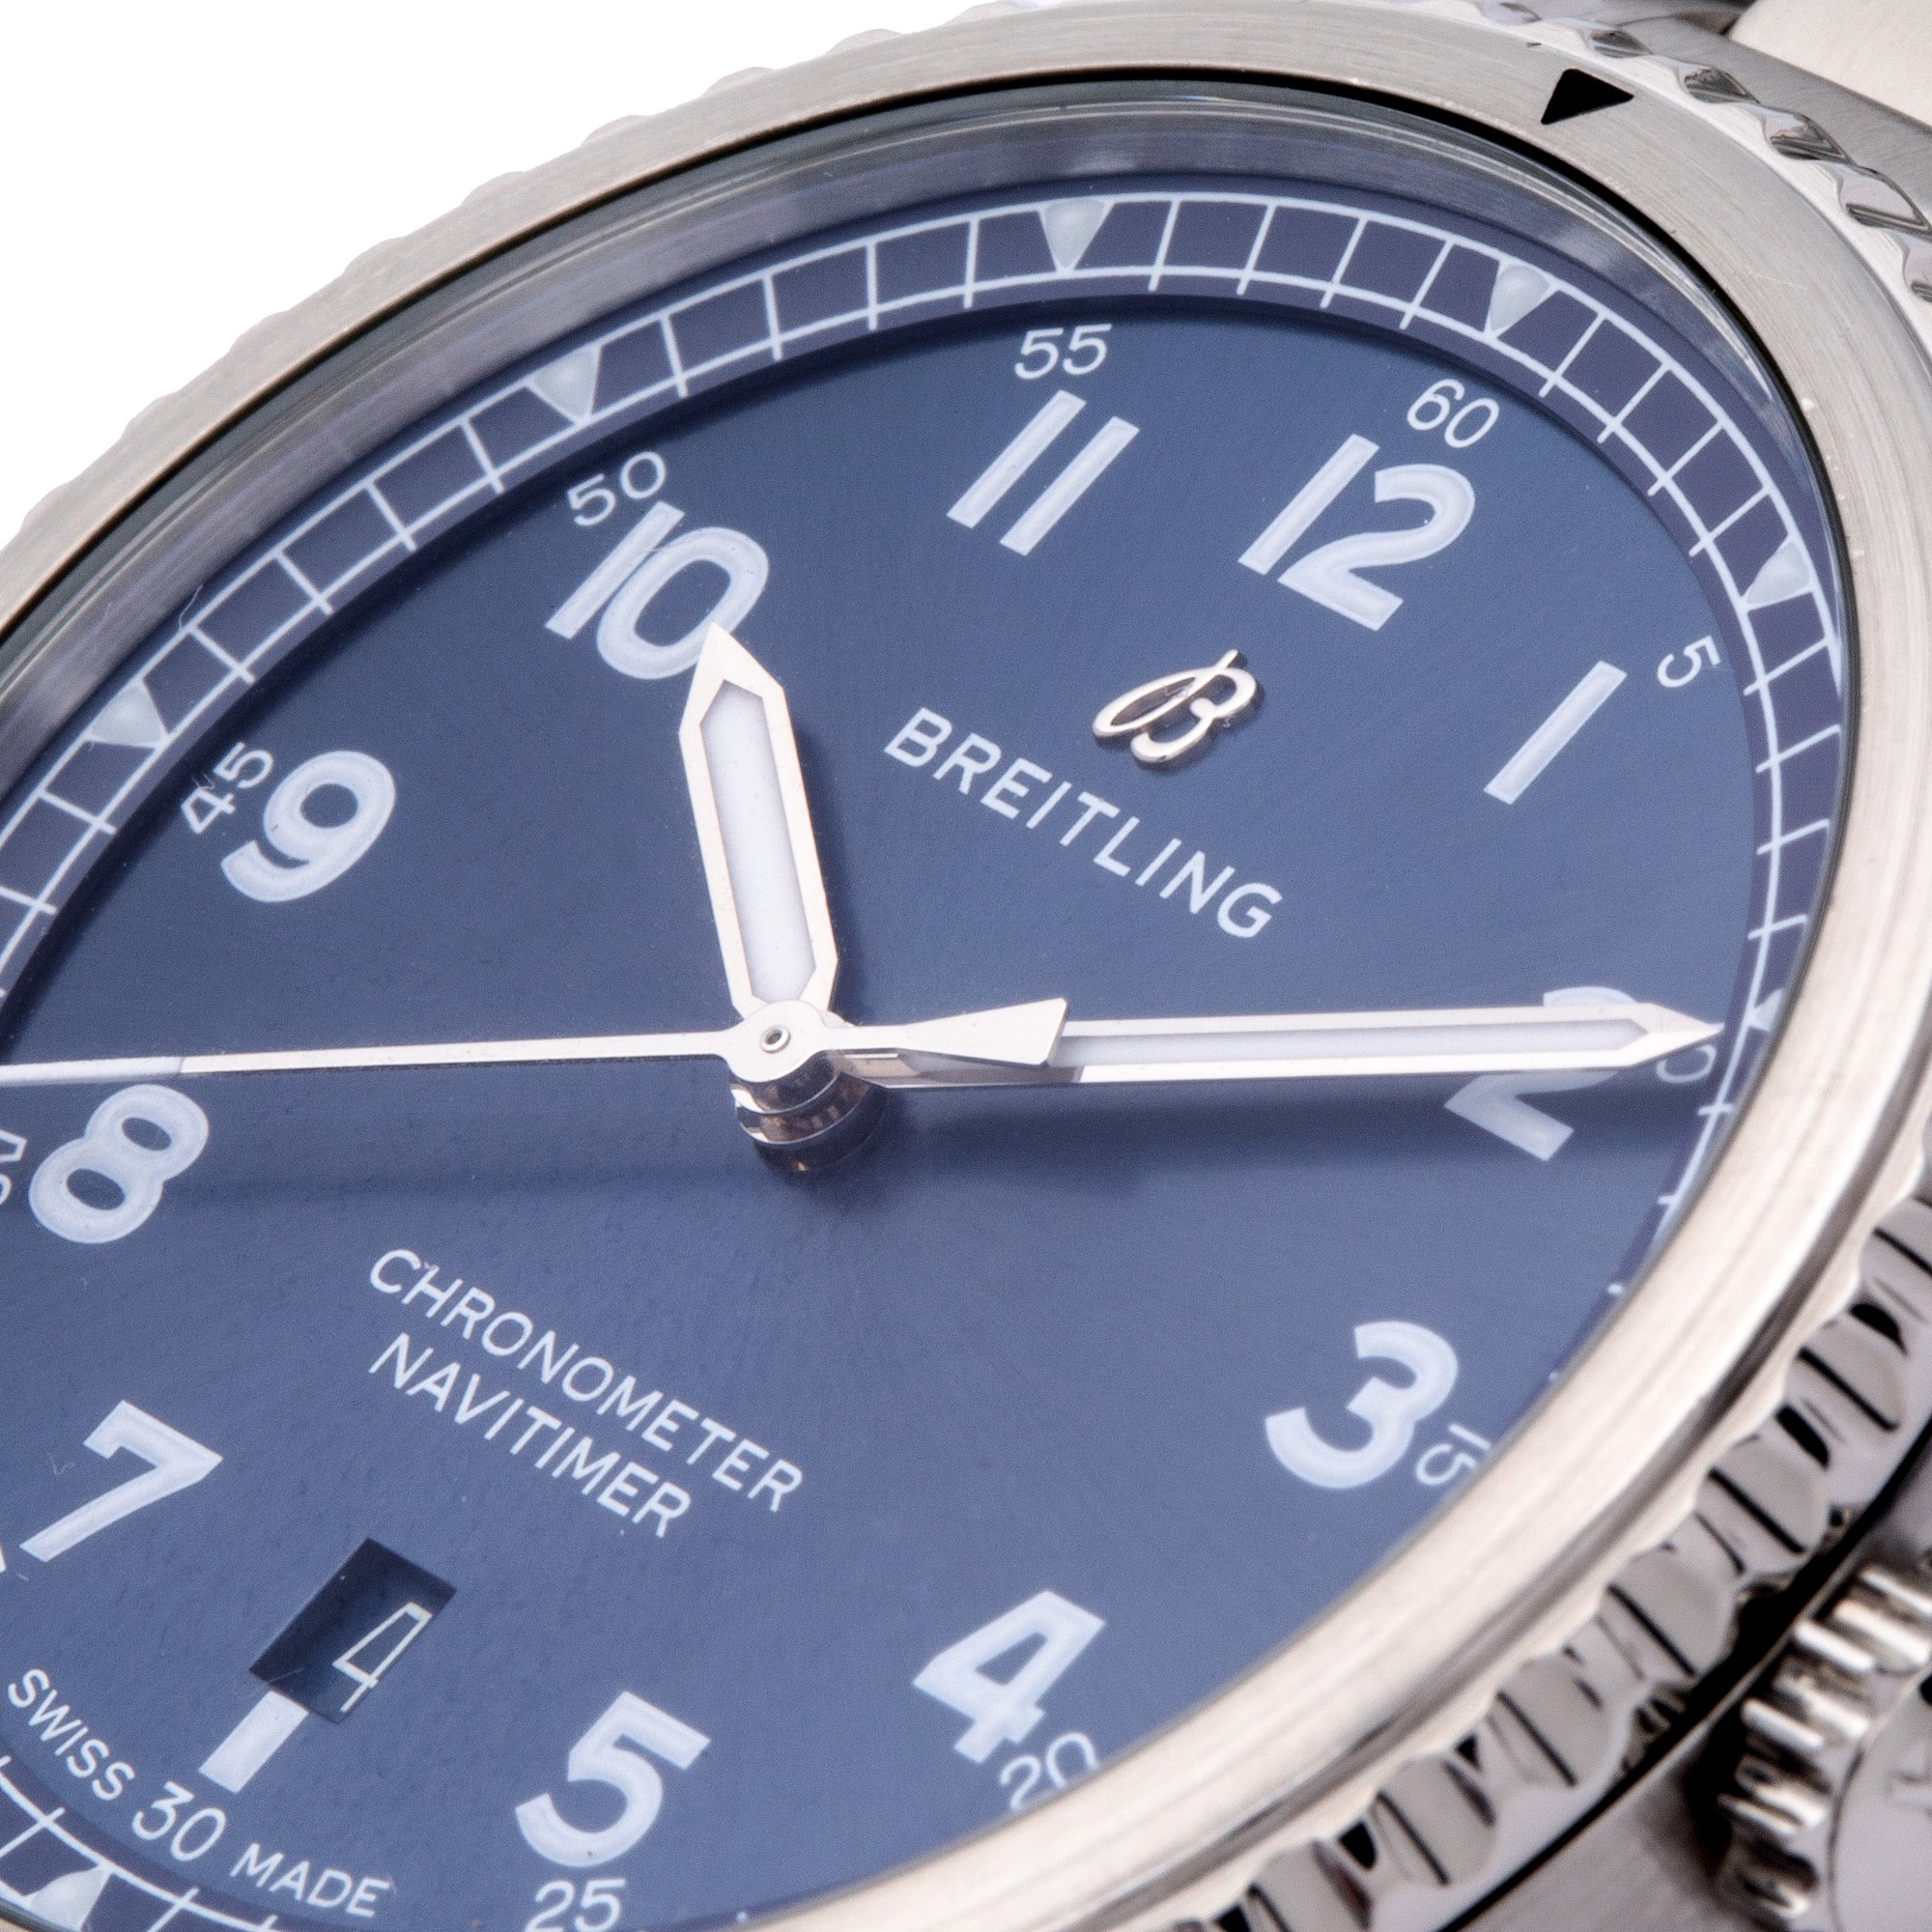 Breitling Navitimer 8 Stainless Steel A17314